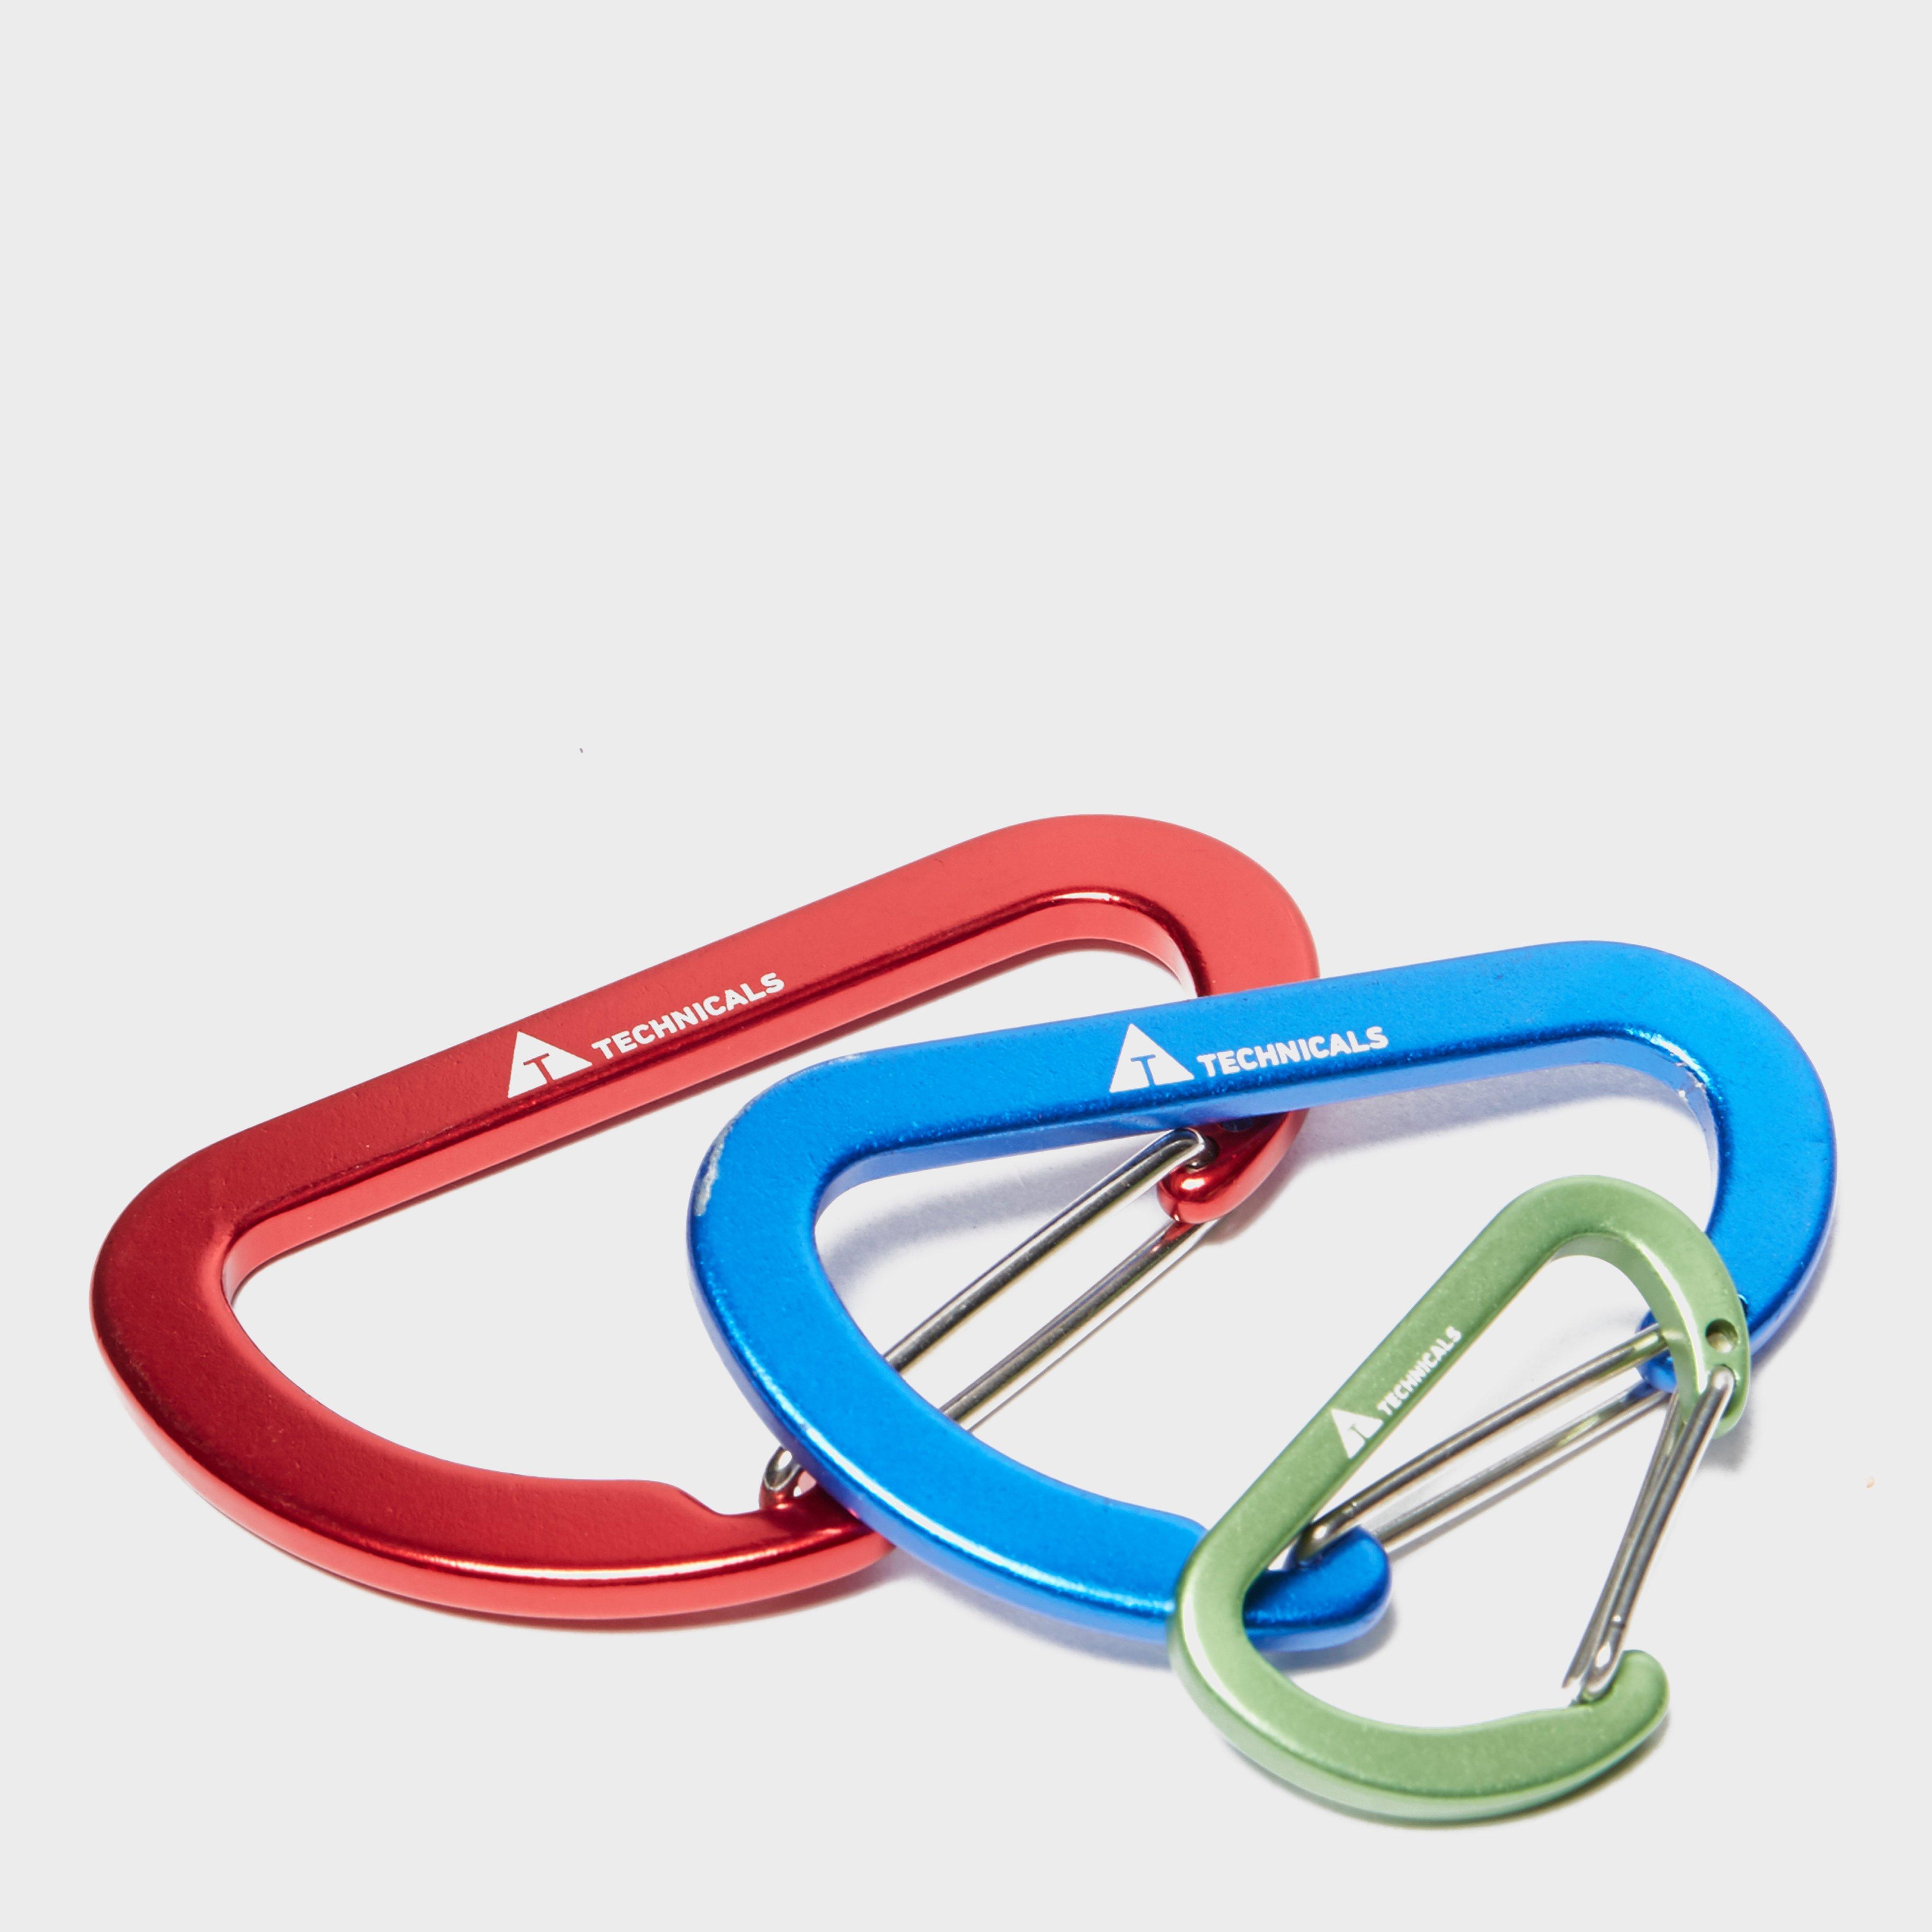 Technicals Set of 3 Carabiners Review